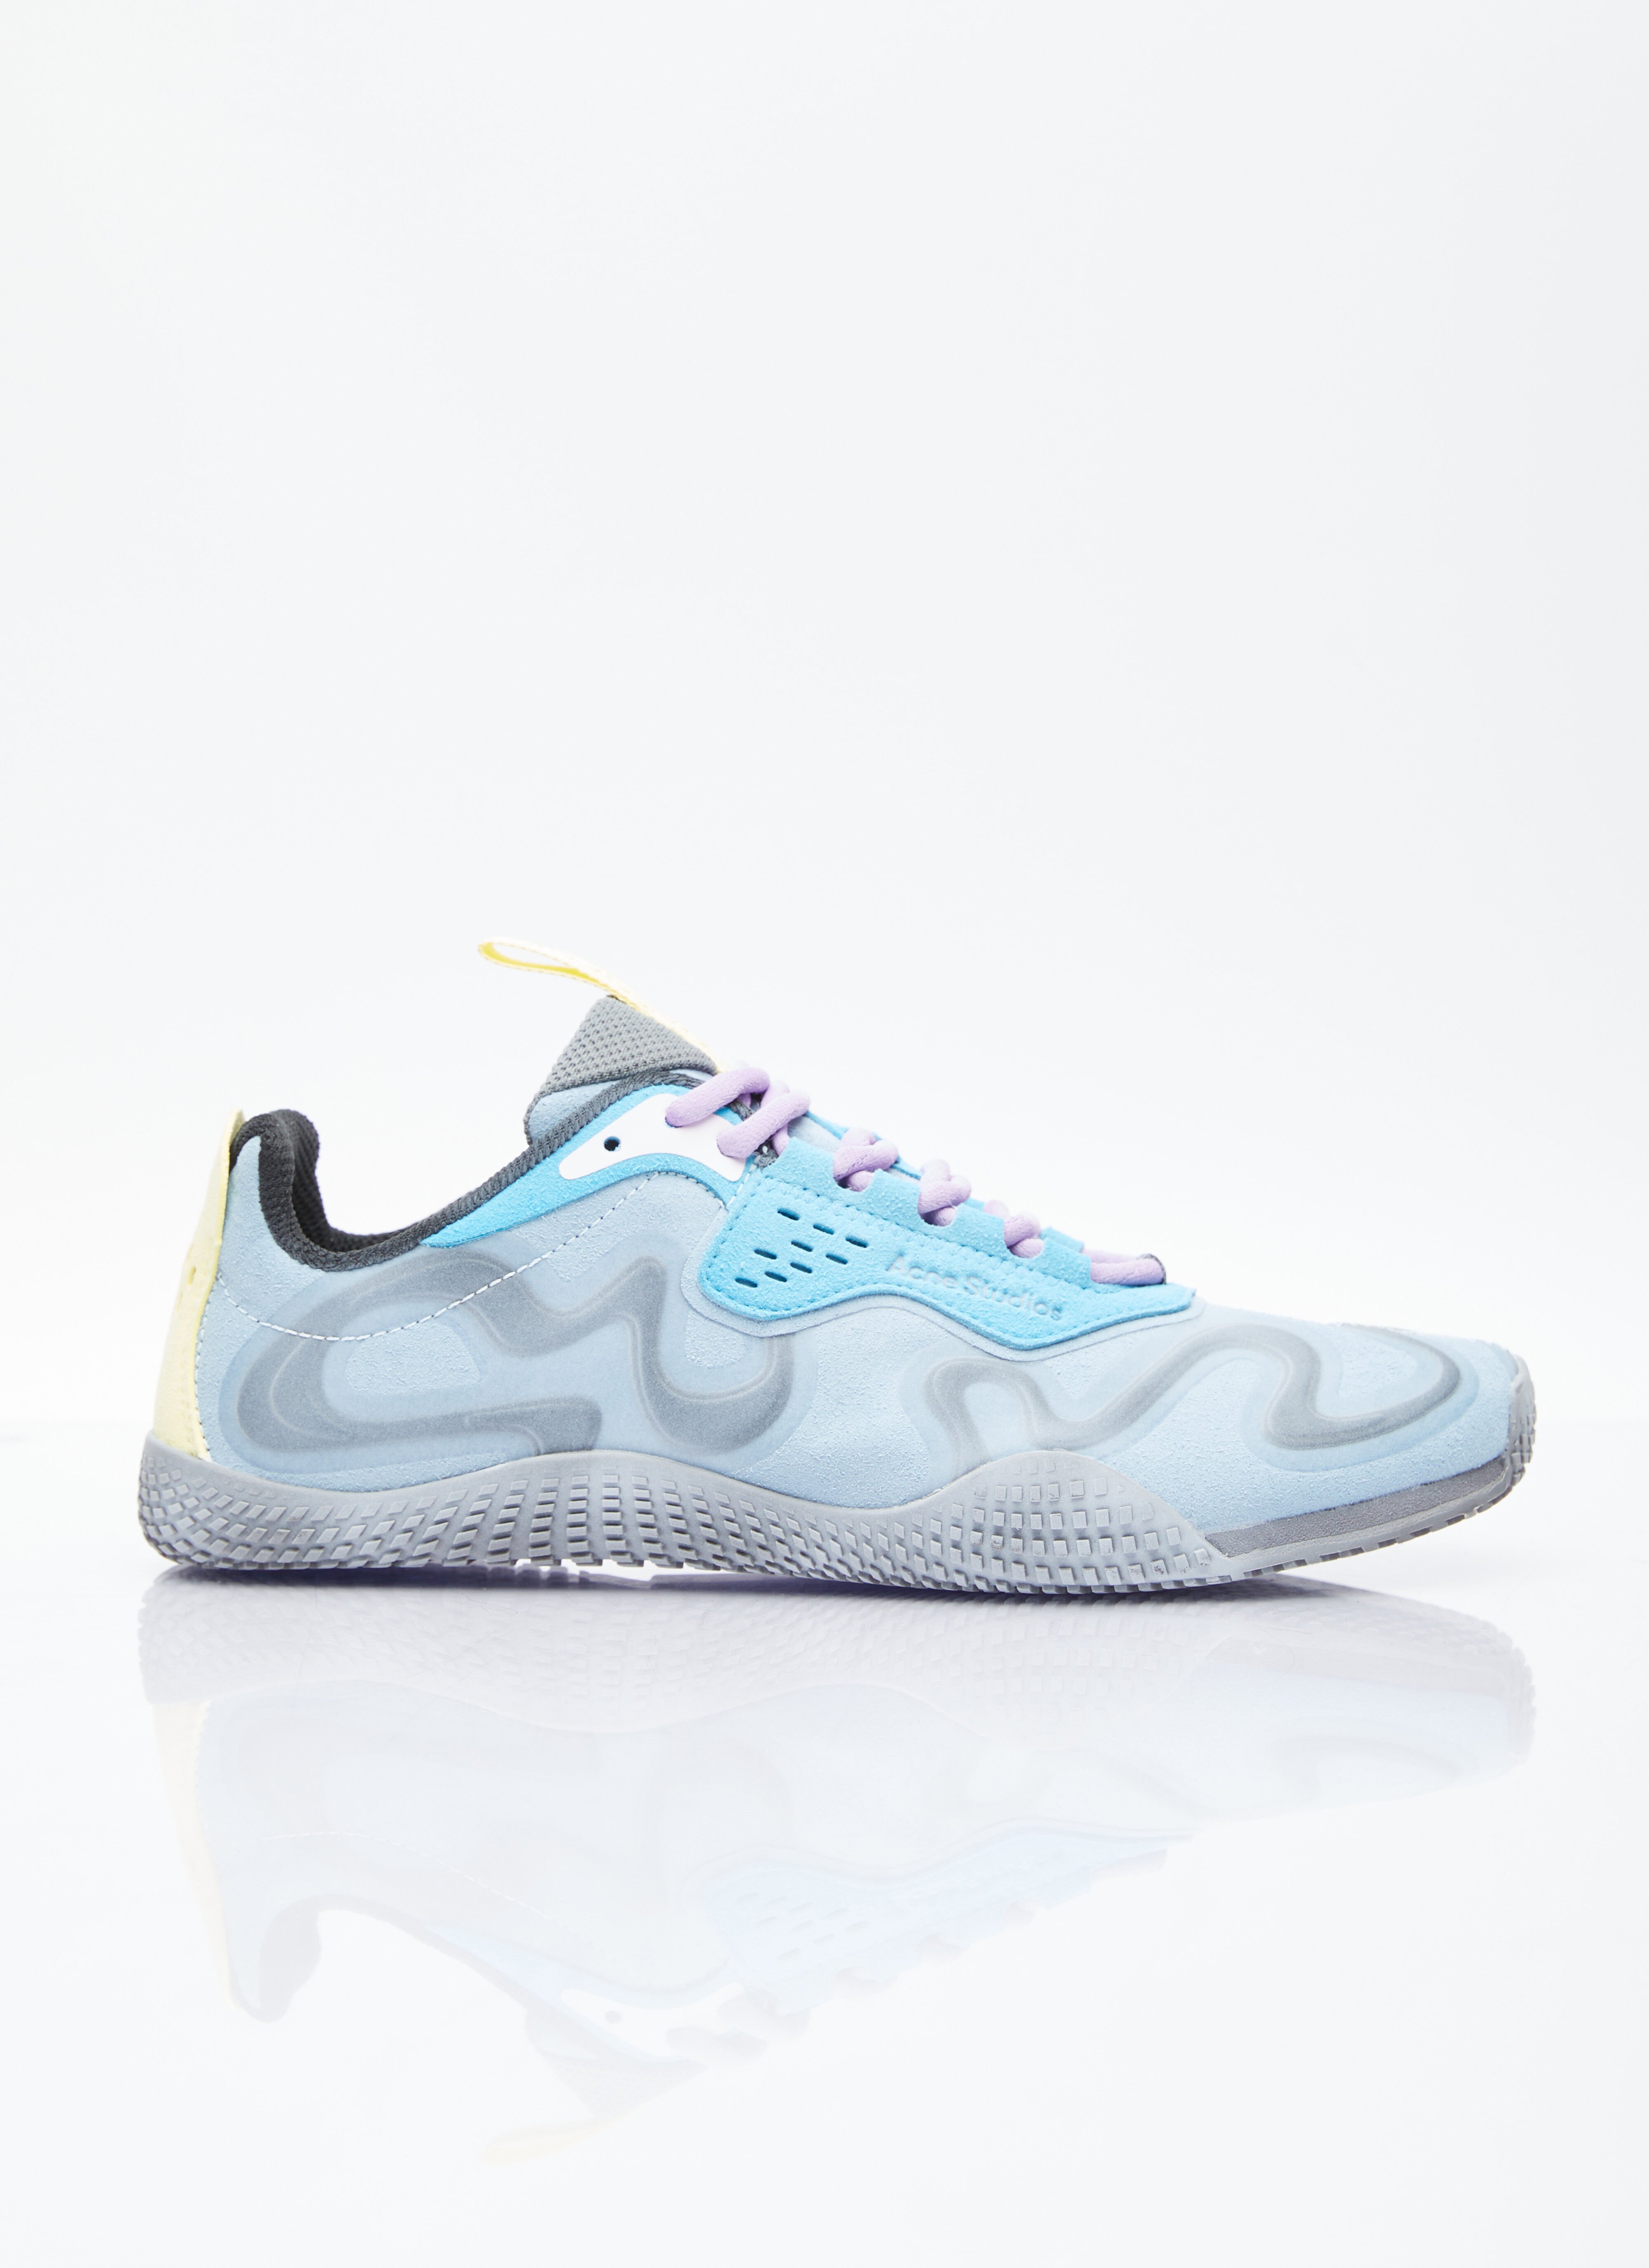 Acne Studios - BUBBA Sneakers | HBX - Globally Curated Fashion and  Lifestyle by Hypebeast